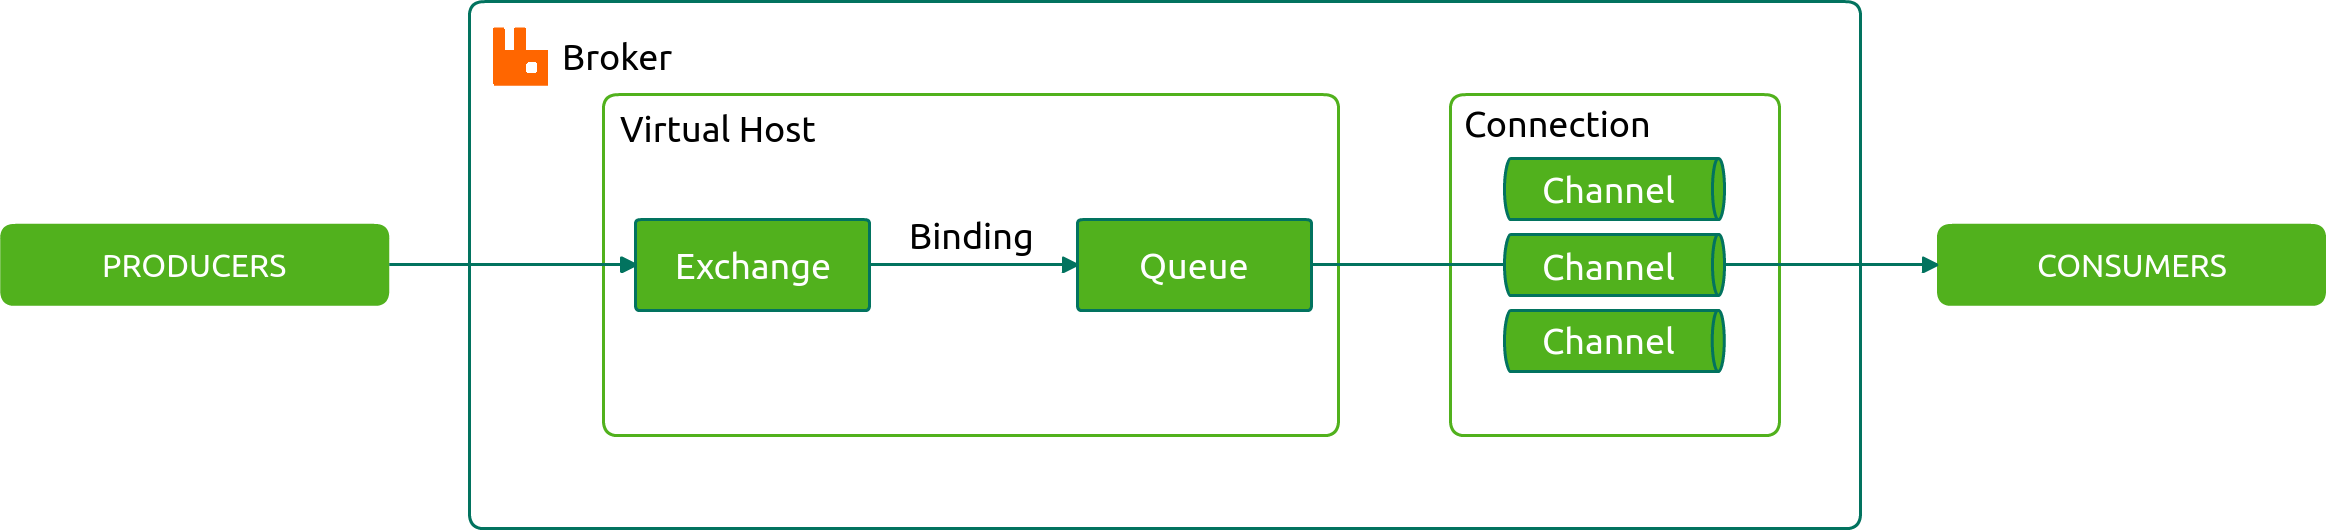 multiple producers -> exchange - binding - queue -> multiple consumers